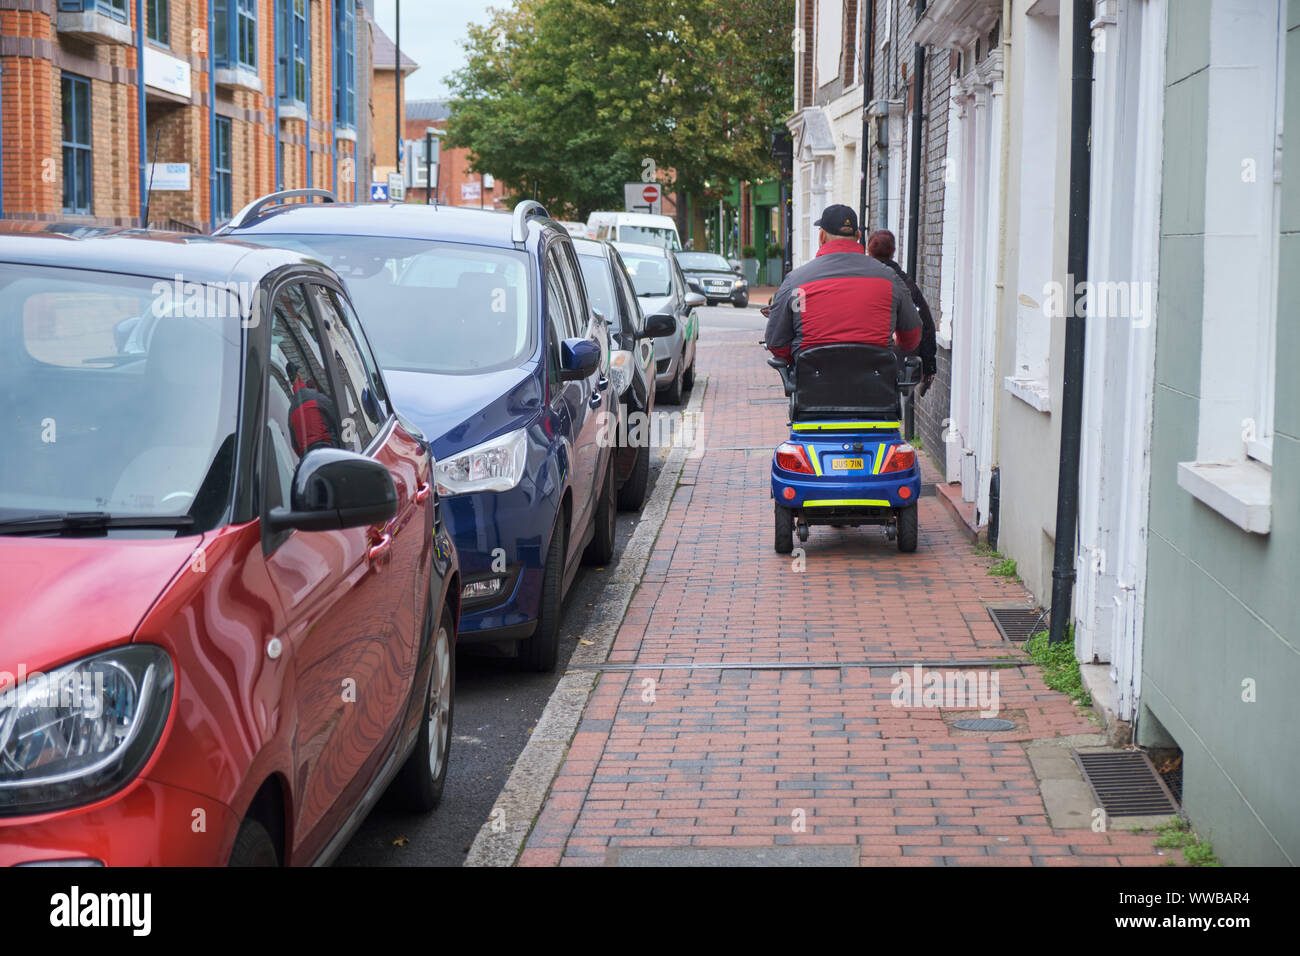 Reduced mobility person on electric scooter riding on narrow sidewalk being slowed down by a pedestrian in front. Lewes, UK, September 2019 Stock Photo